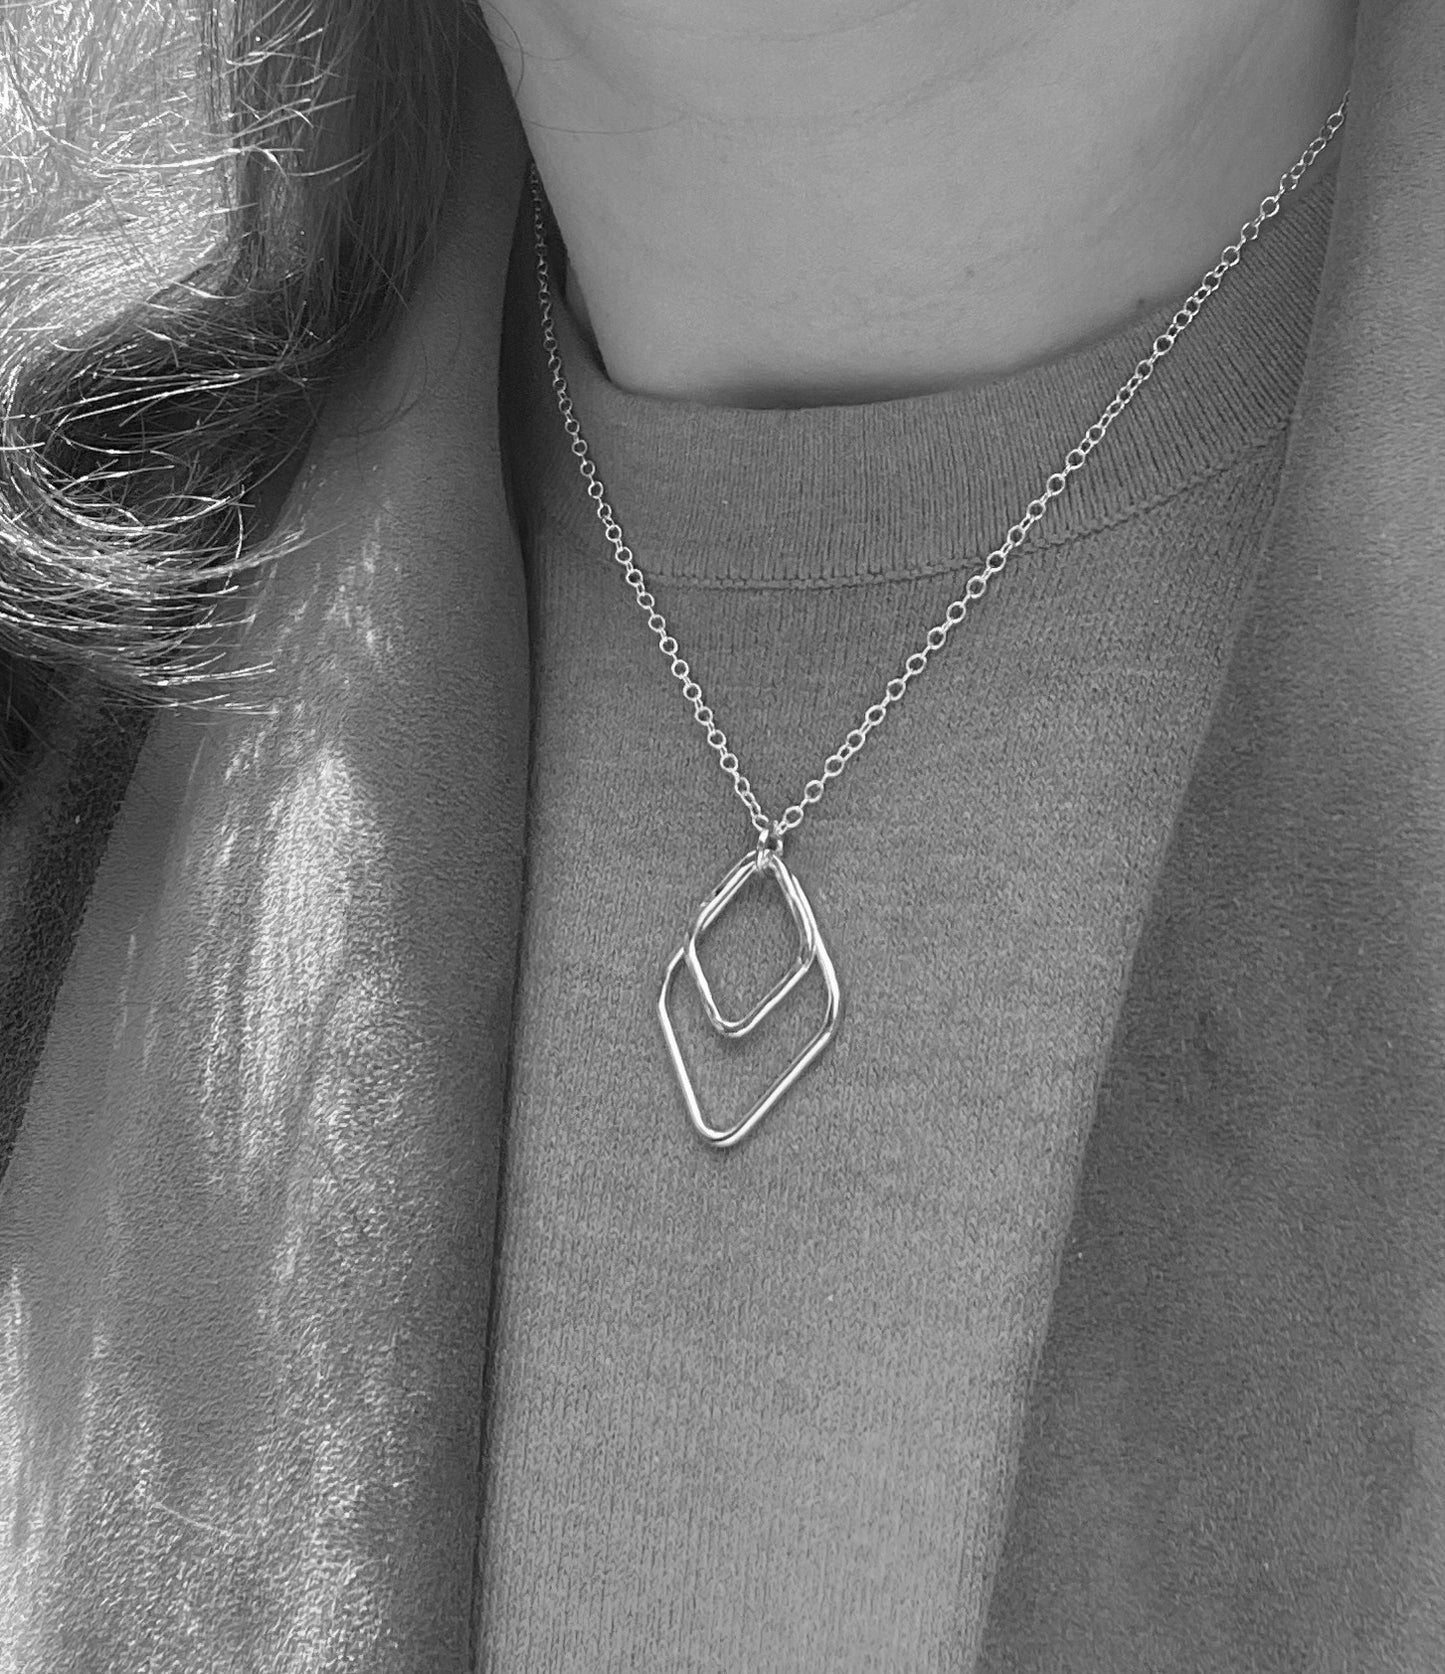 Sterling silver kite necklace, rhombus necklace